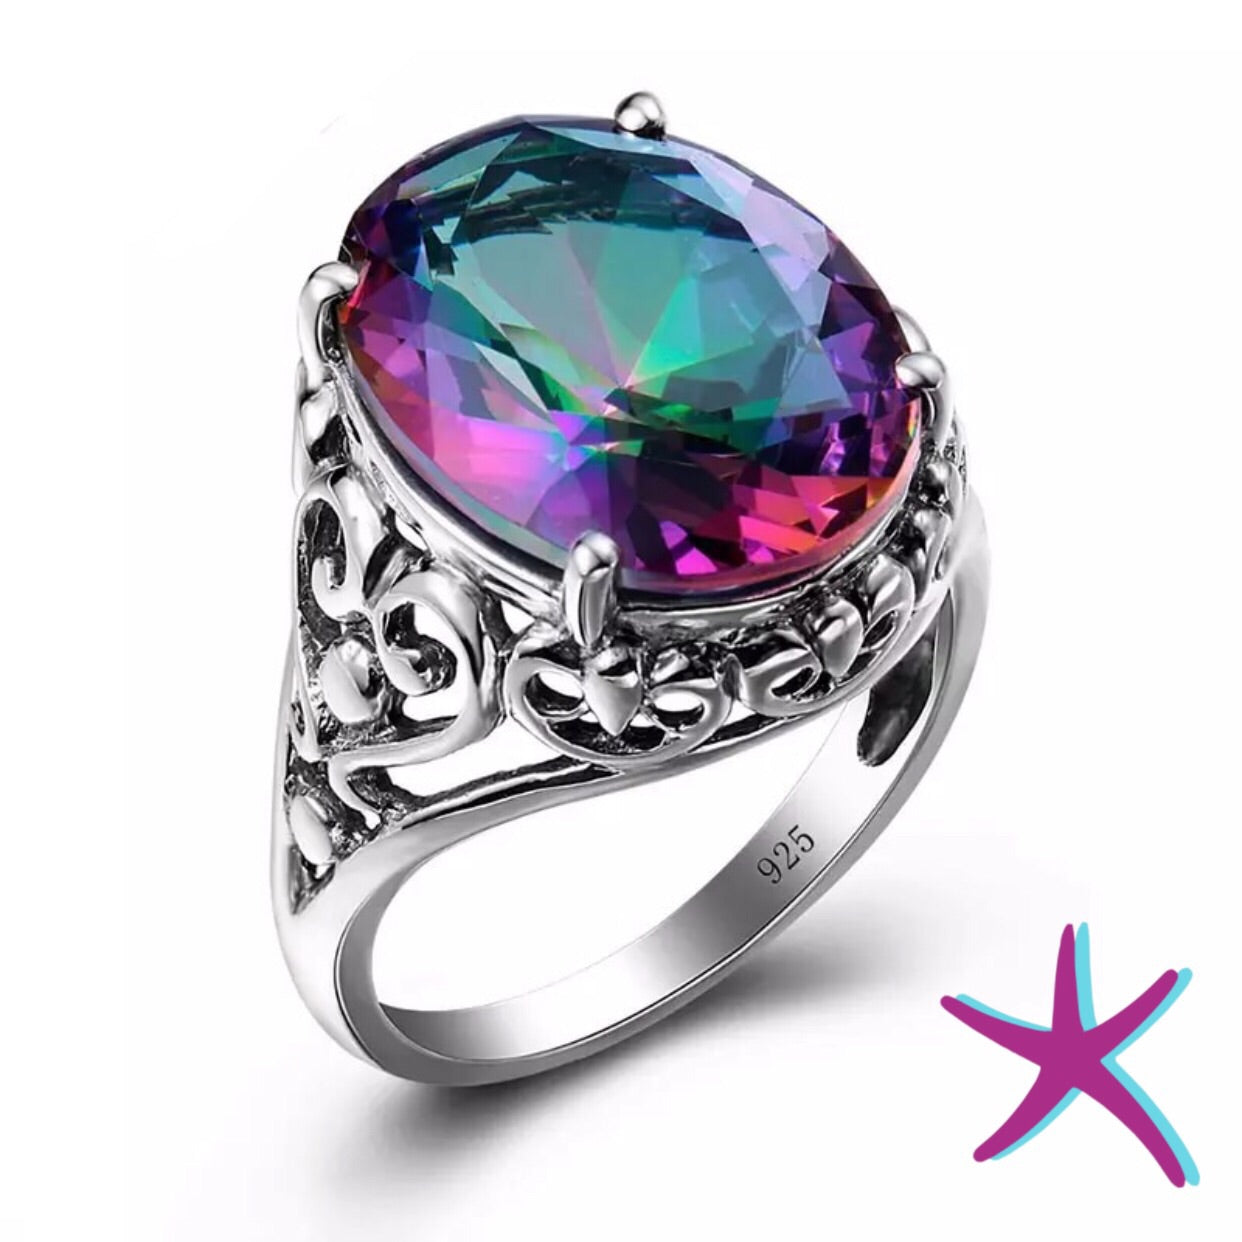  Lzz Sea Goddess Mermaid 925 Sterling Silver Ring Fashion  Two-Color Mermaid Ring Inlaid Blue Cubic Zirconia Female Ring Size 6-10 (US Code  10)